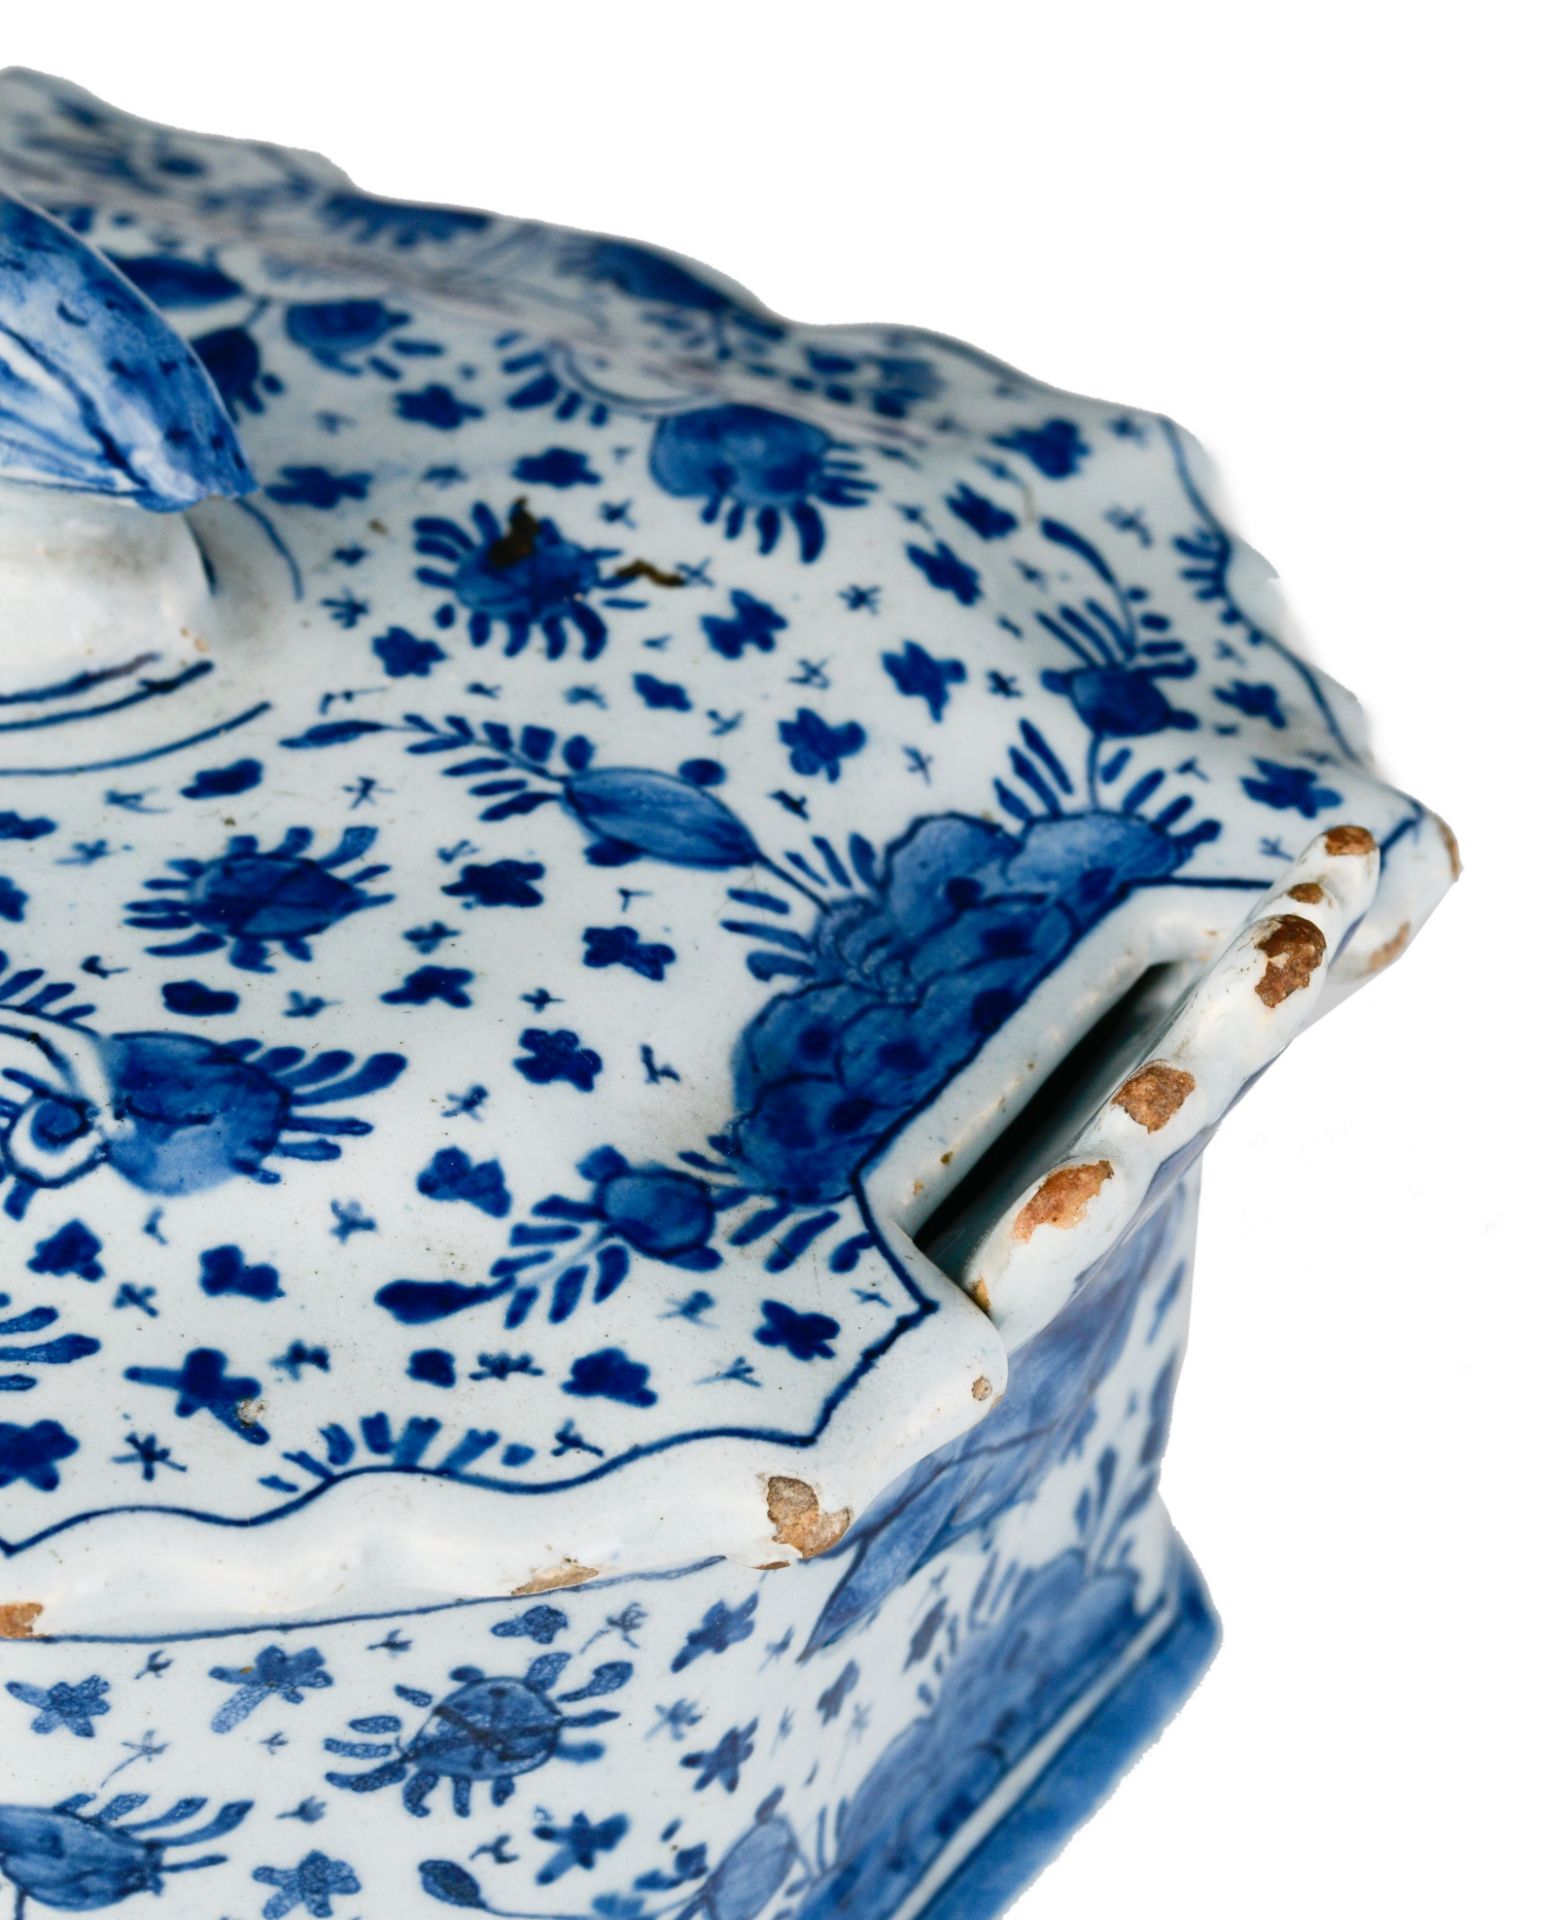 (BIDDING ONLY ON CARLOBONTE.BE) A fine Delft blue and white butter tub, marked 'De Lampetkan', 18thC - Image 14 of 14